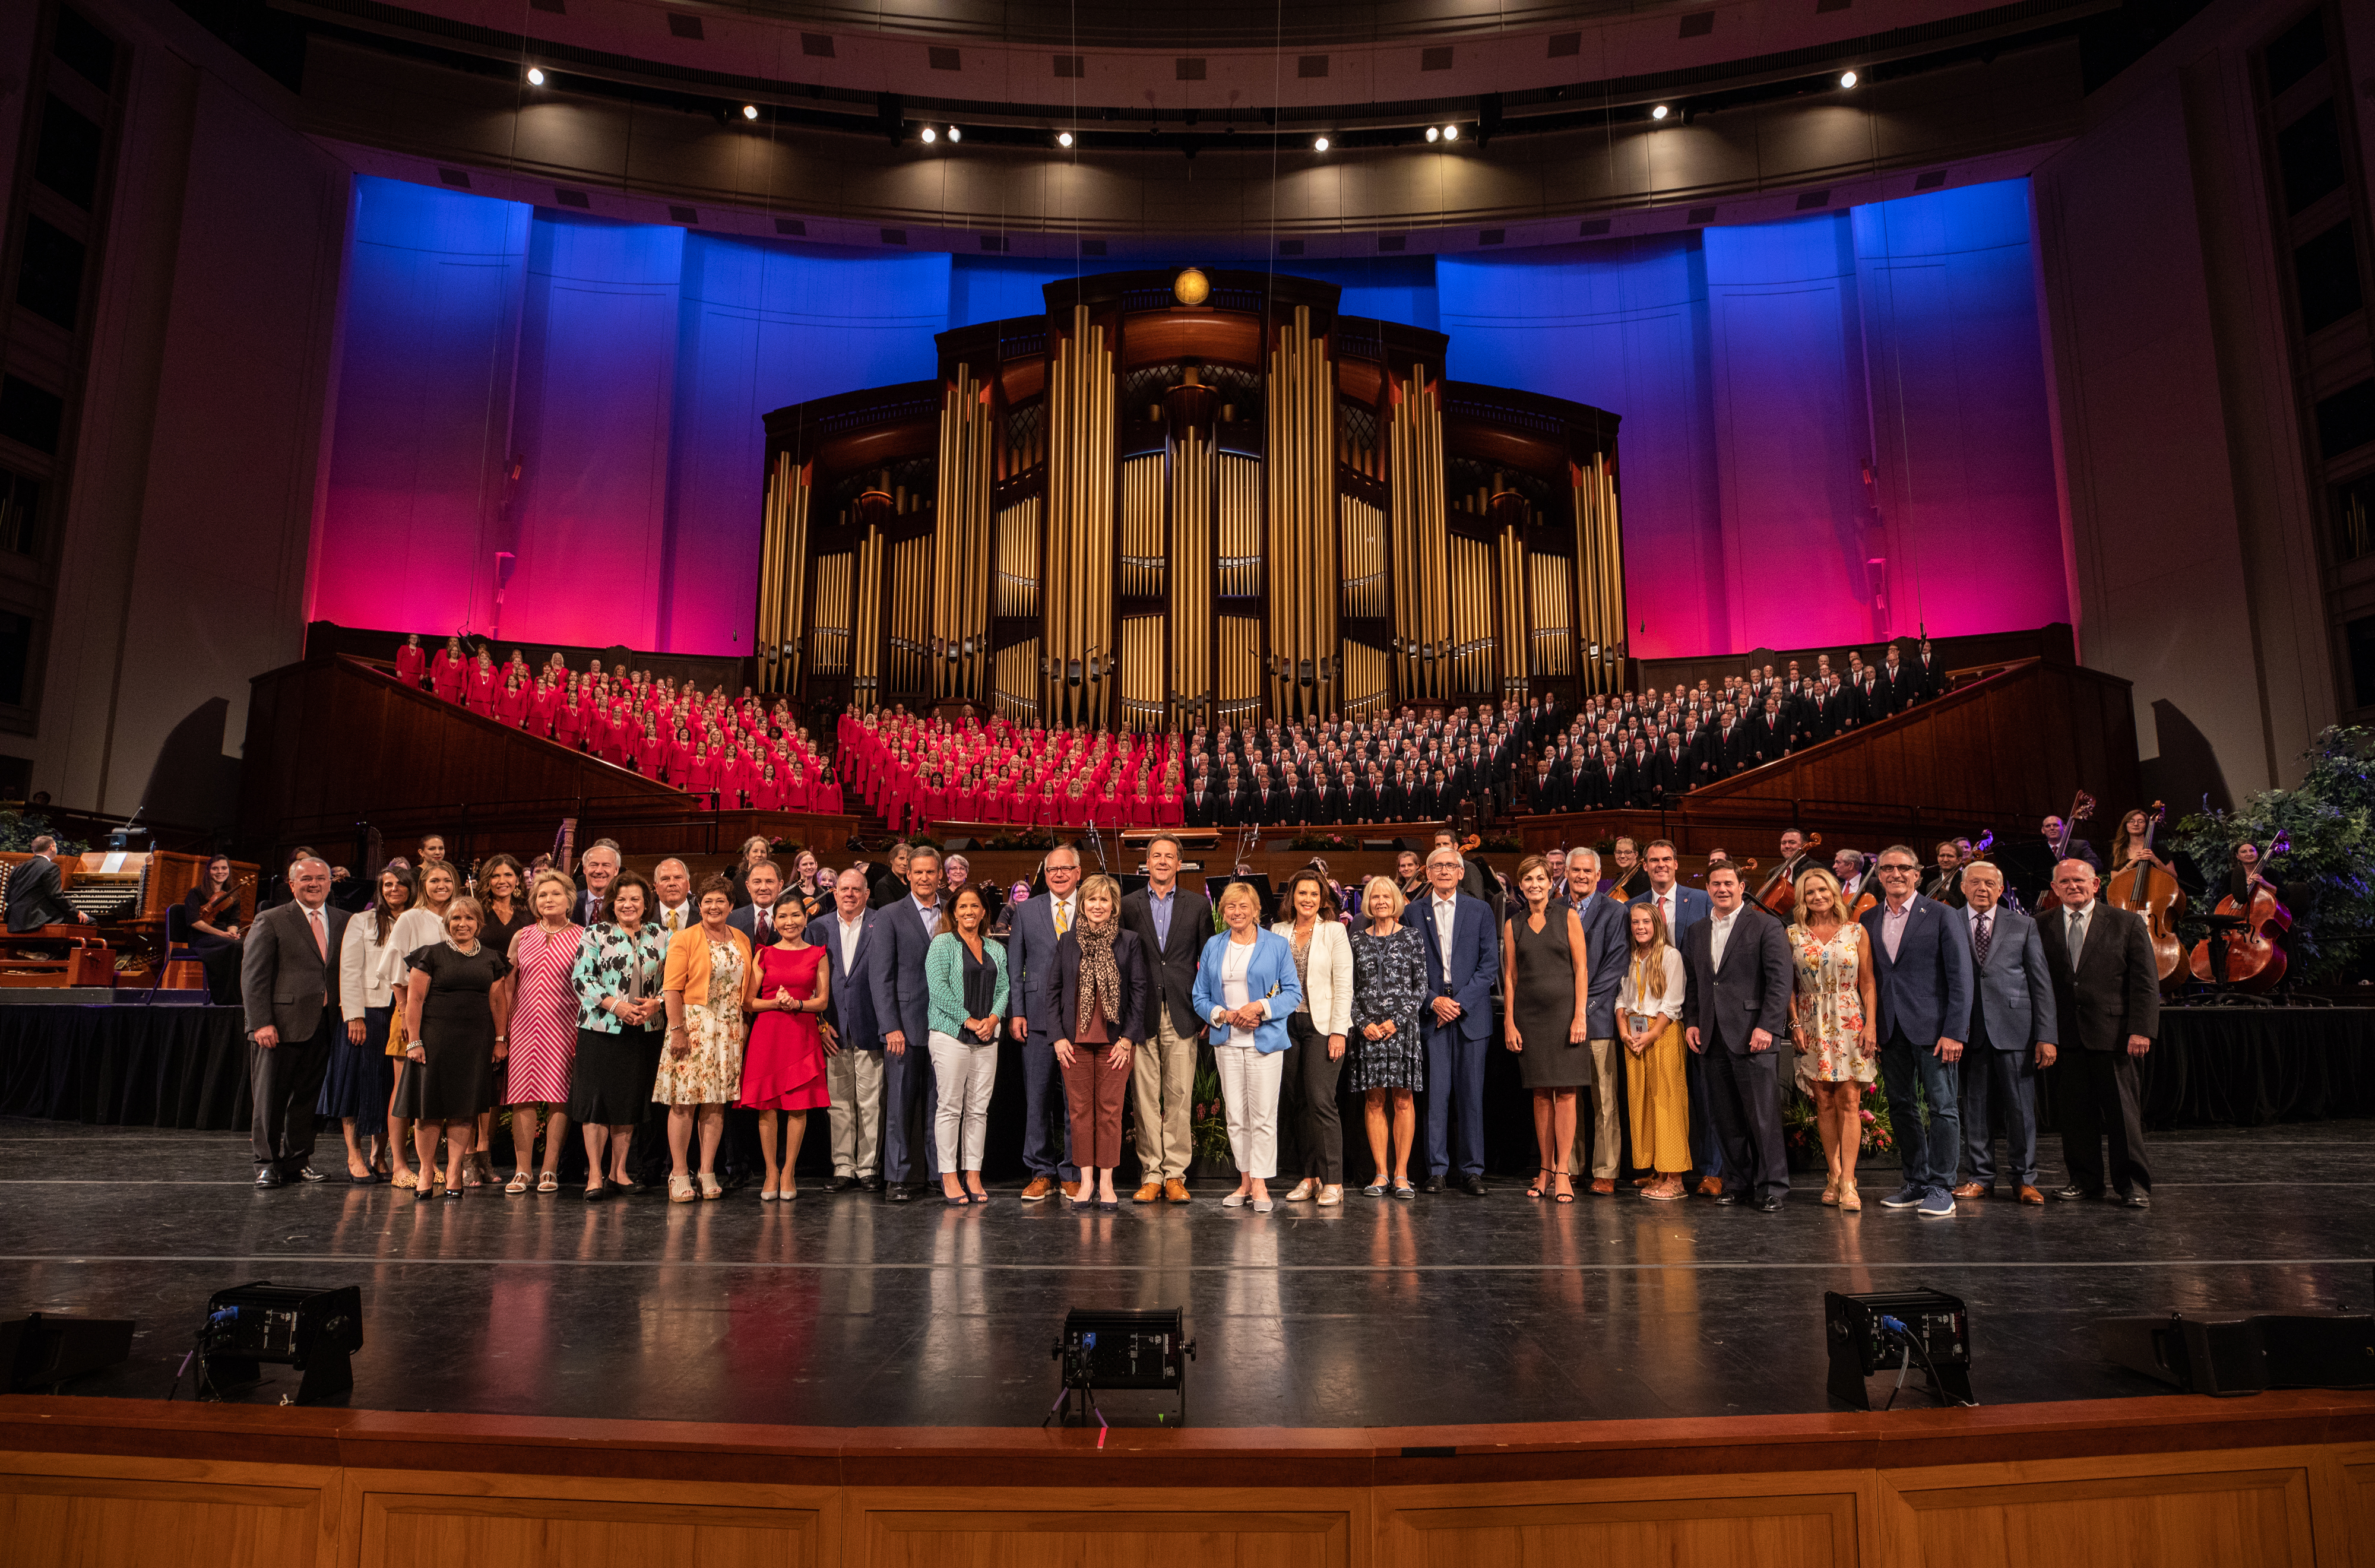 Governors gather on the LDS Conference Center stage with the Tabernacle Choir after a private concert.